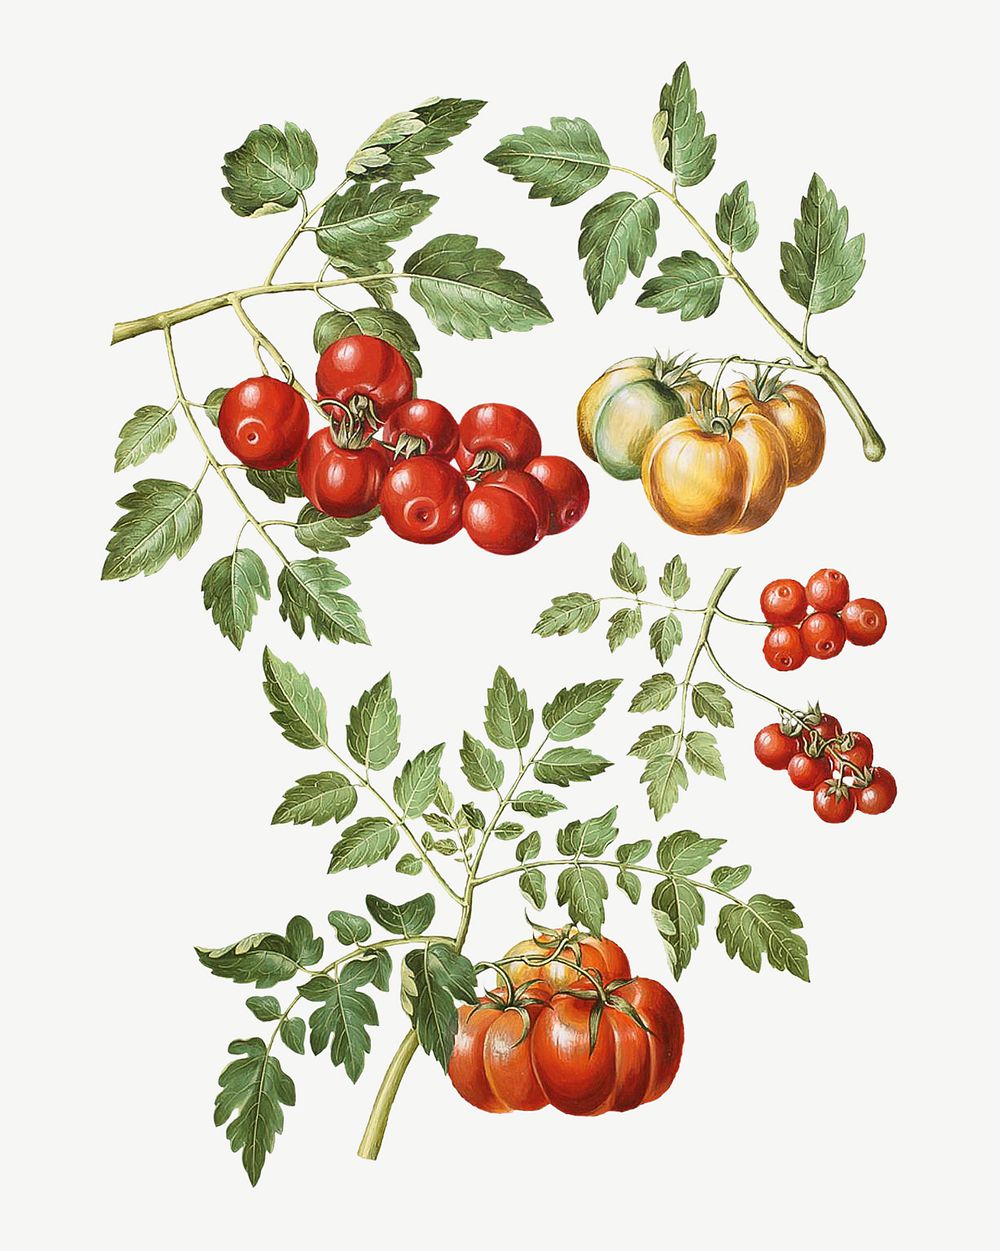 Tomato branches watercolor illustration element psd. Remixed from Maria Sibylla Merian artwork, by rawpixel.